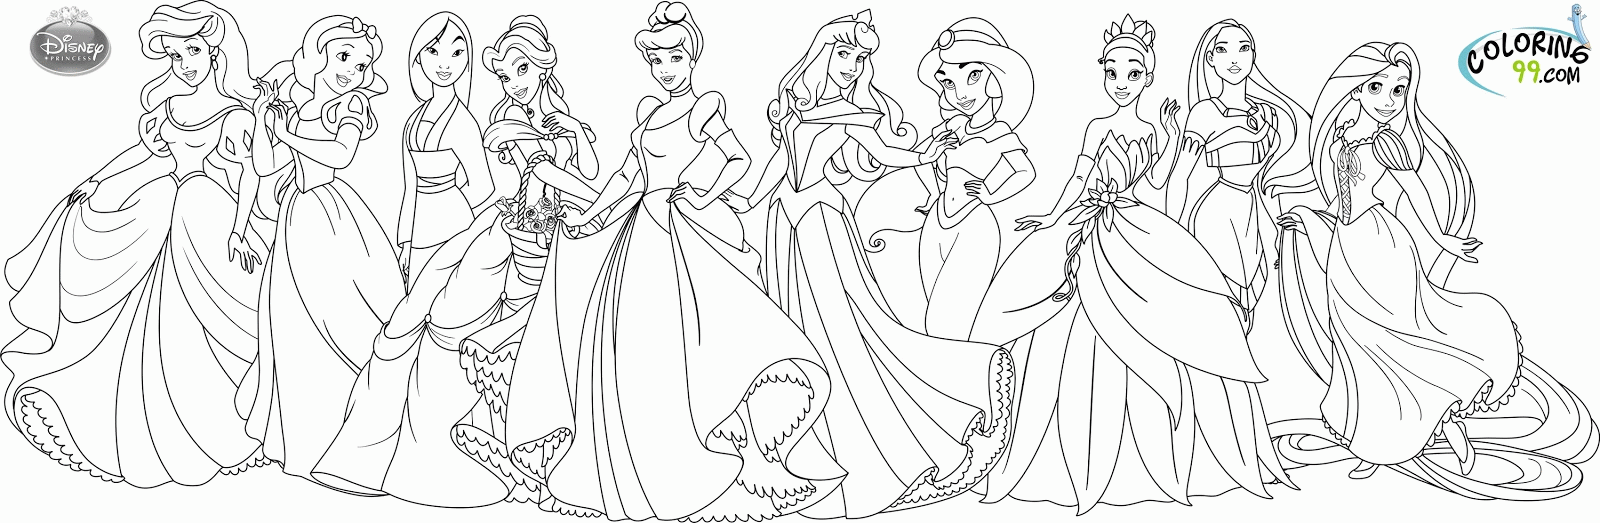 Printable Disney Coloring Pages Tangled | Coloring Online